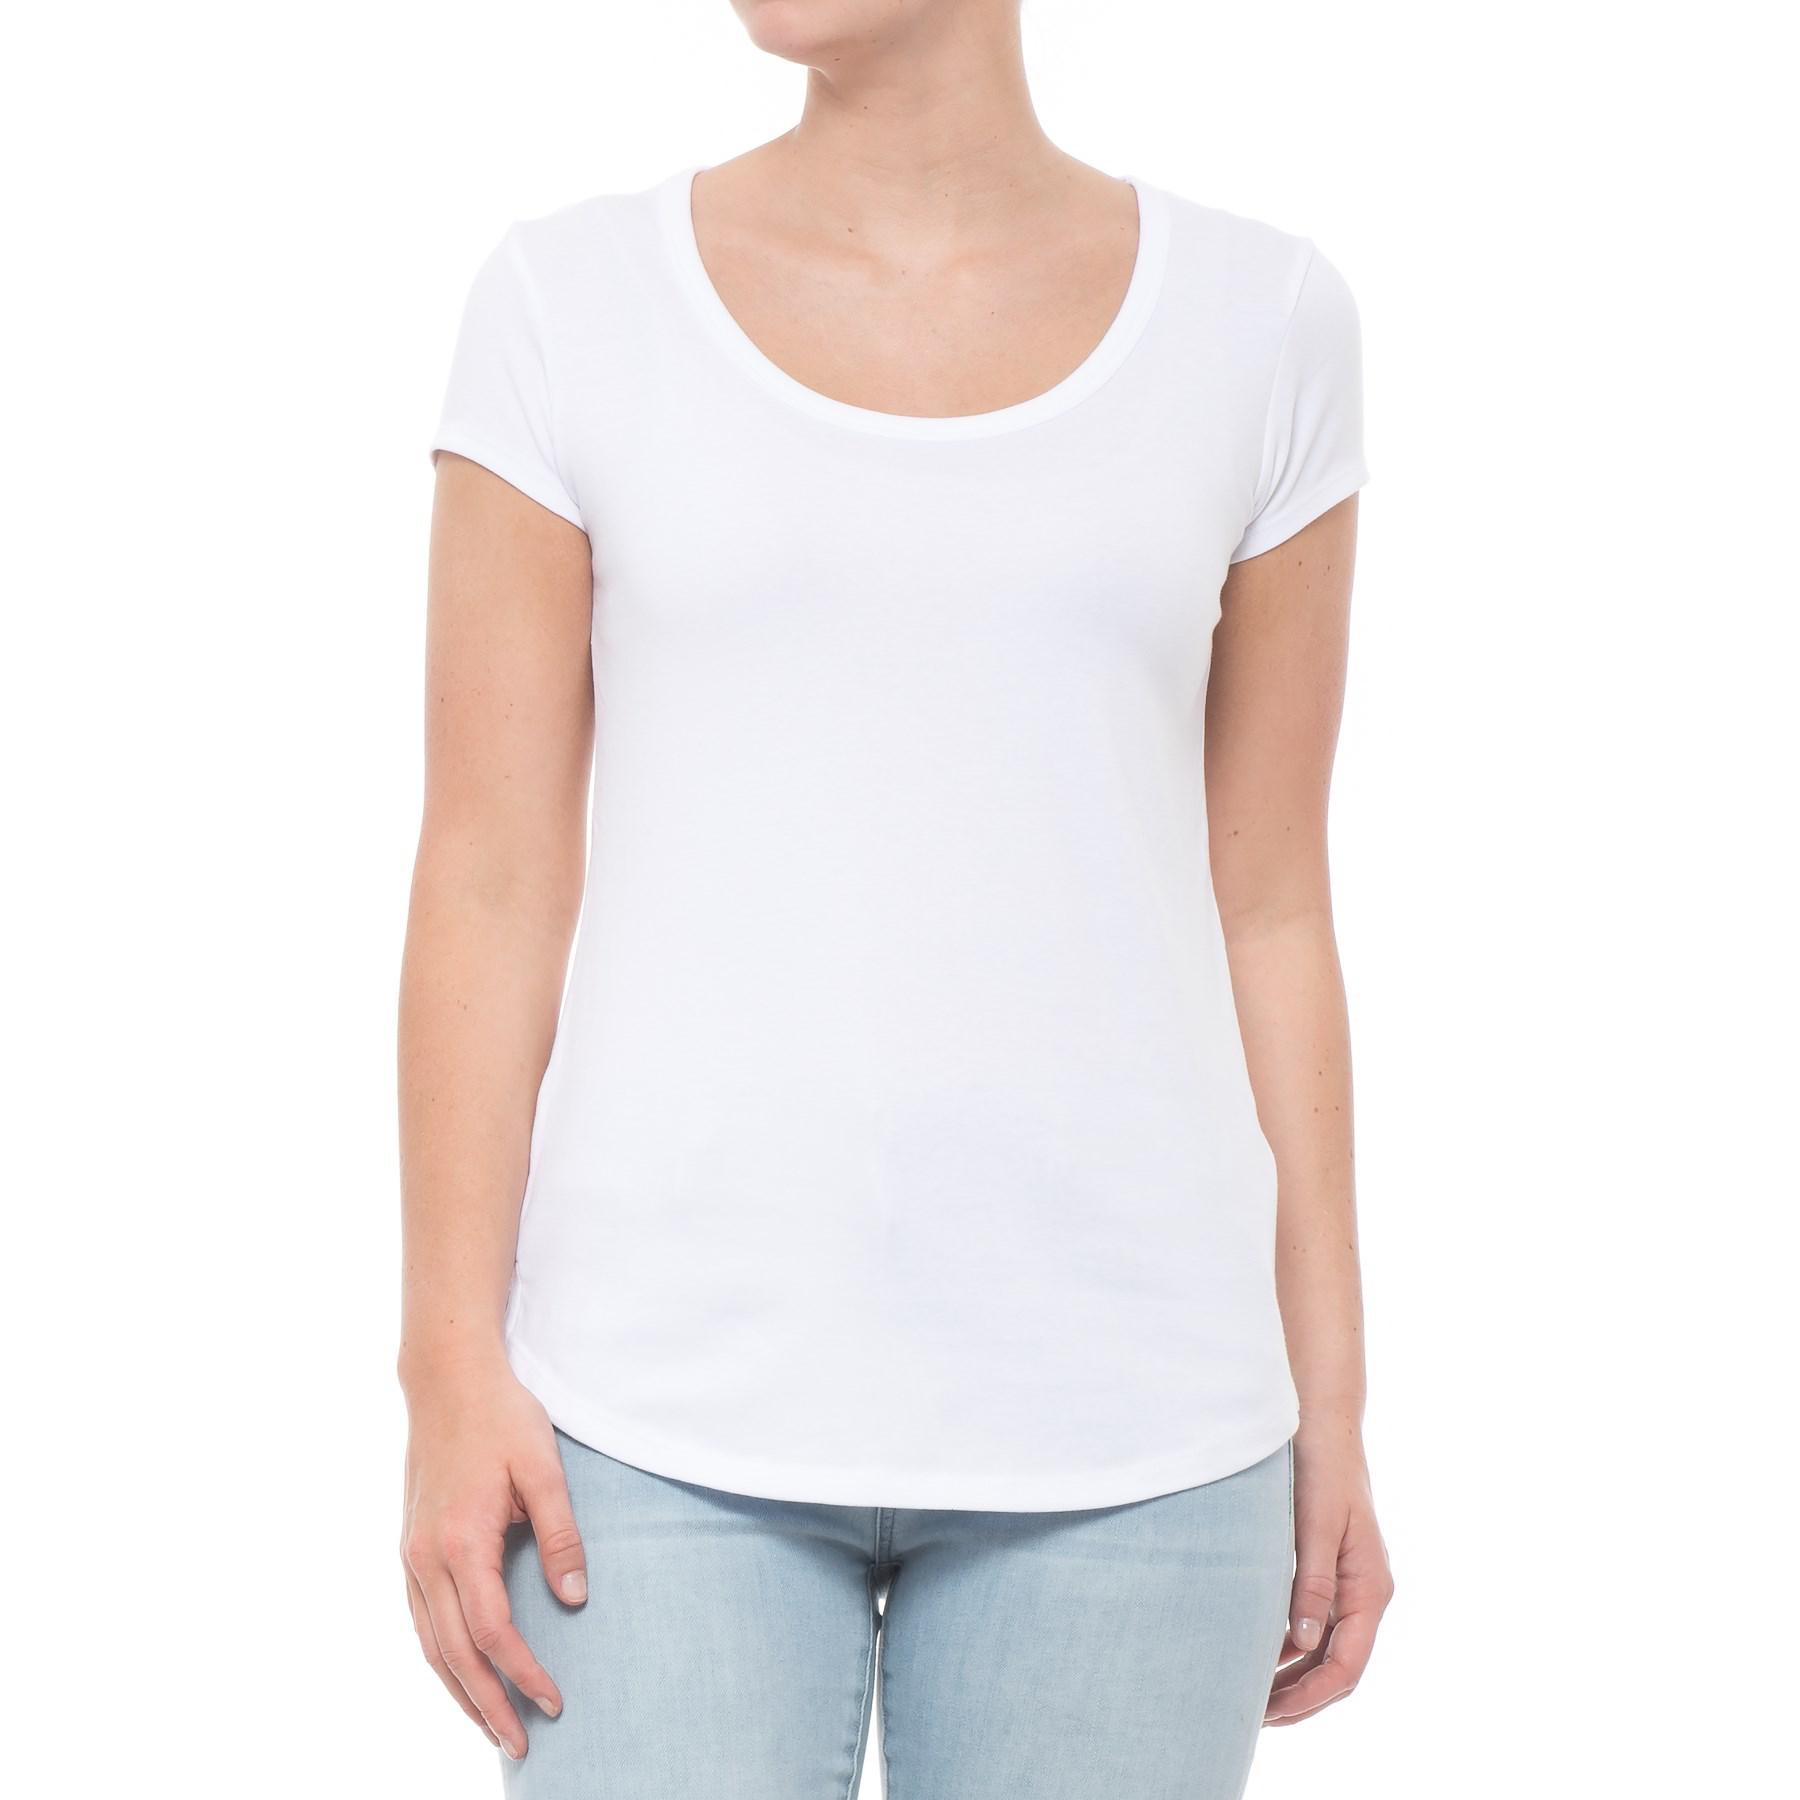 Cynthia Rowley Cotton 1x1 Scoop Shirttail T-shirt in White - Lyst